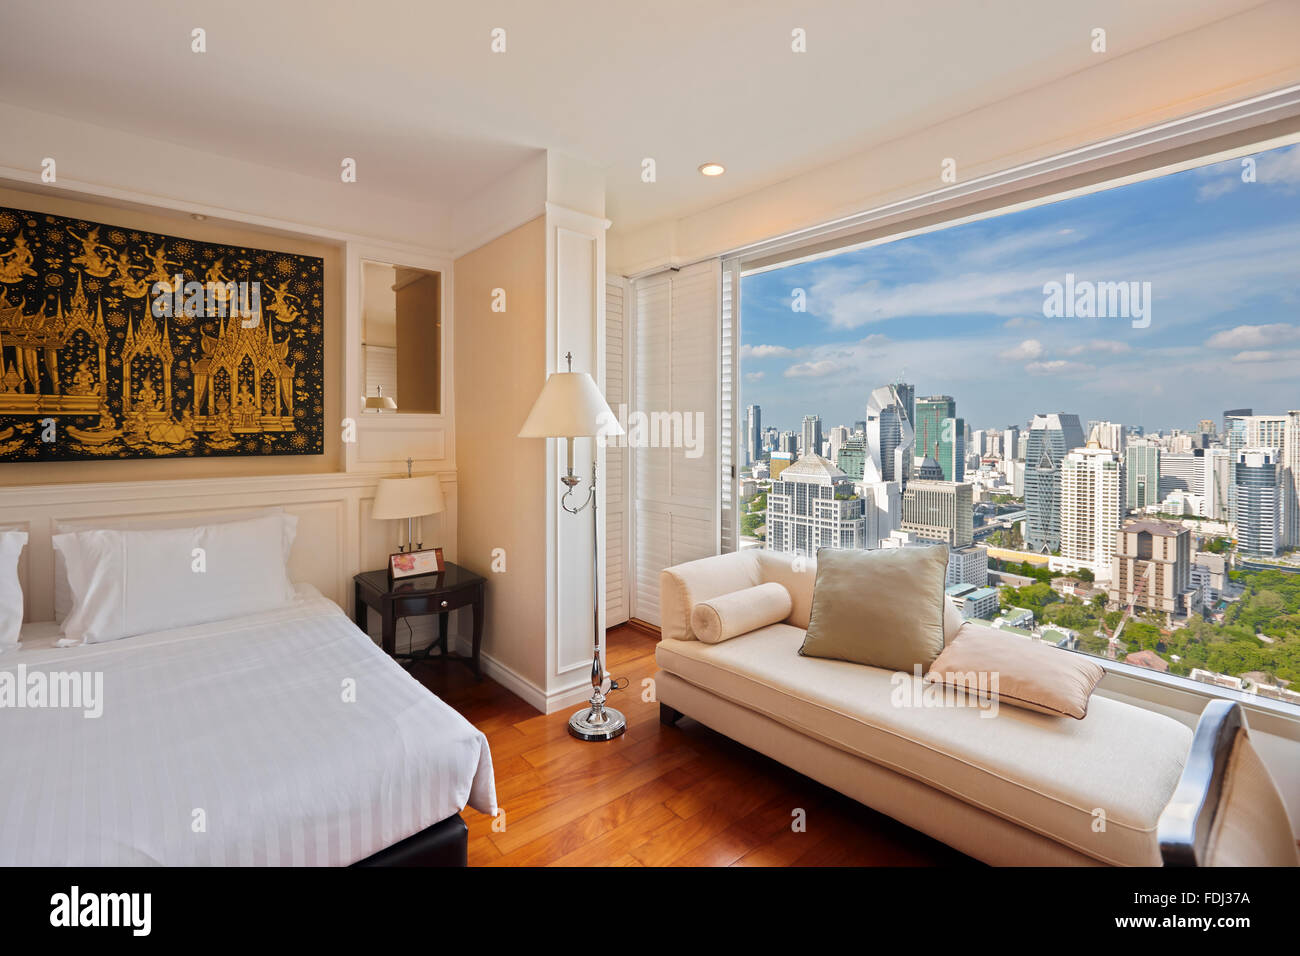 Interior of a hotel room with panoramic view of the city. Grande Centre Point Hotel Ratchadamri, Bangkok, Thailand. Stock Photo